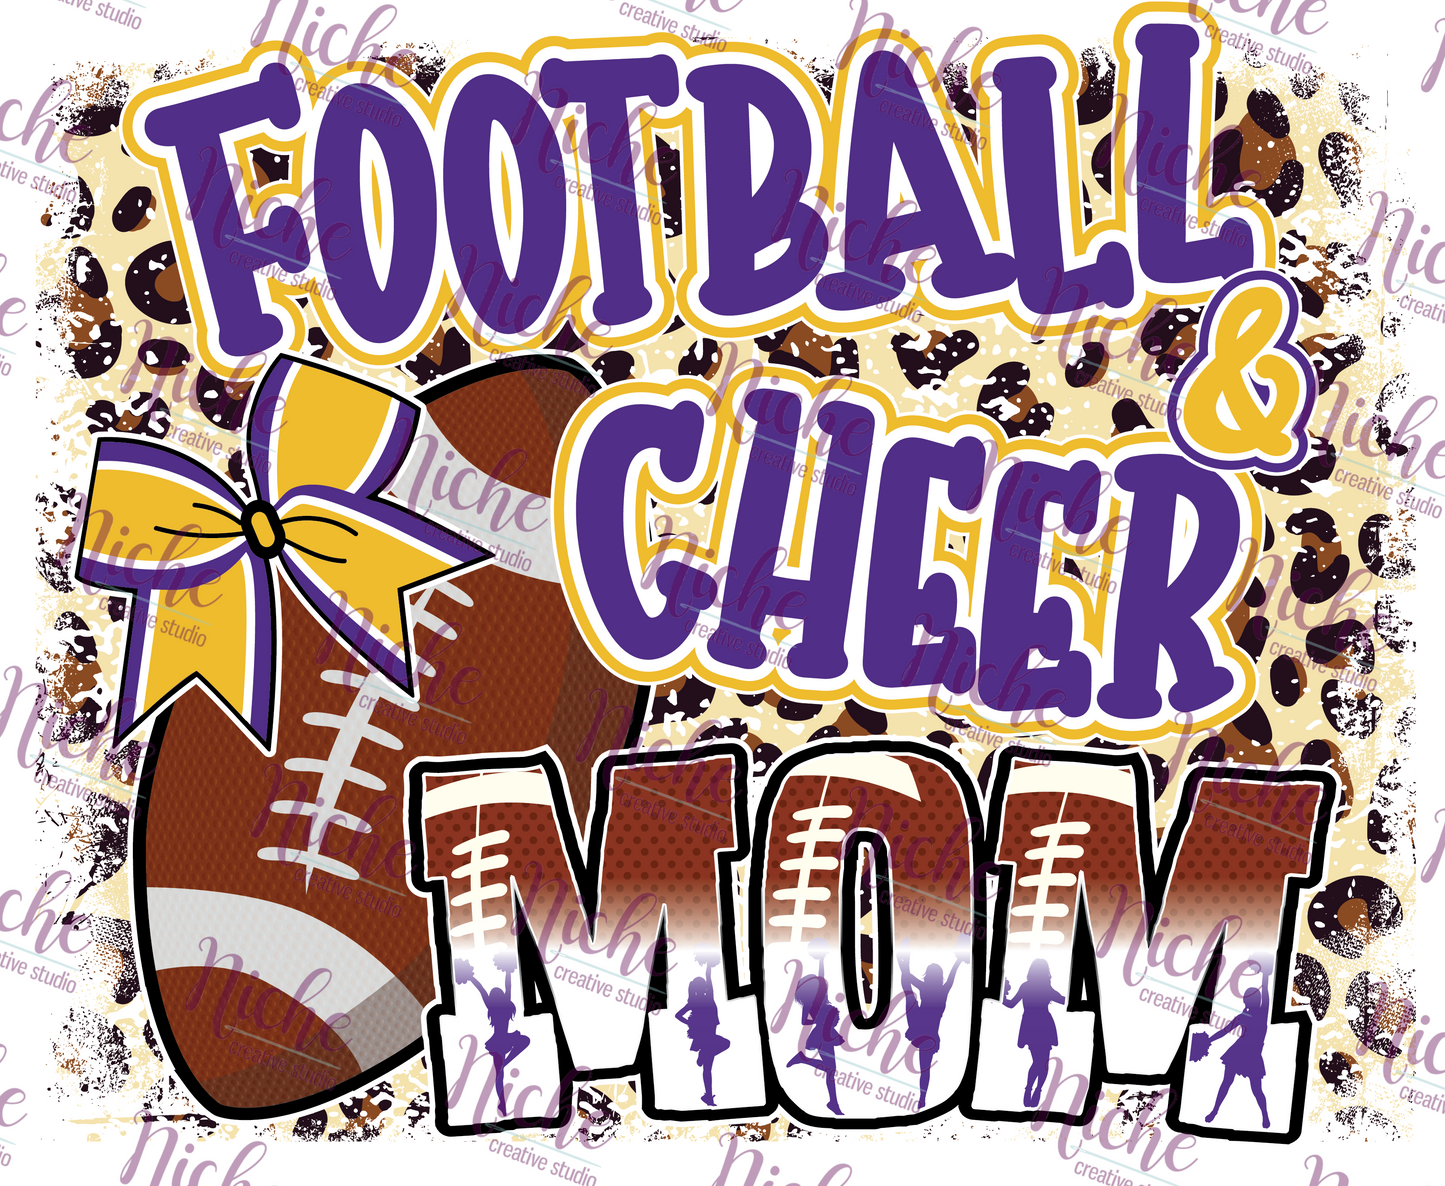 -SPO717 Football and Cheer Mom Decal